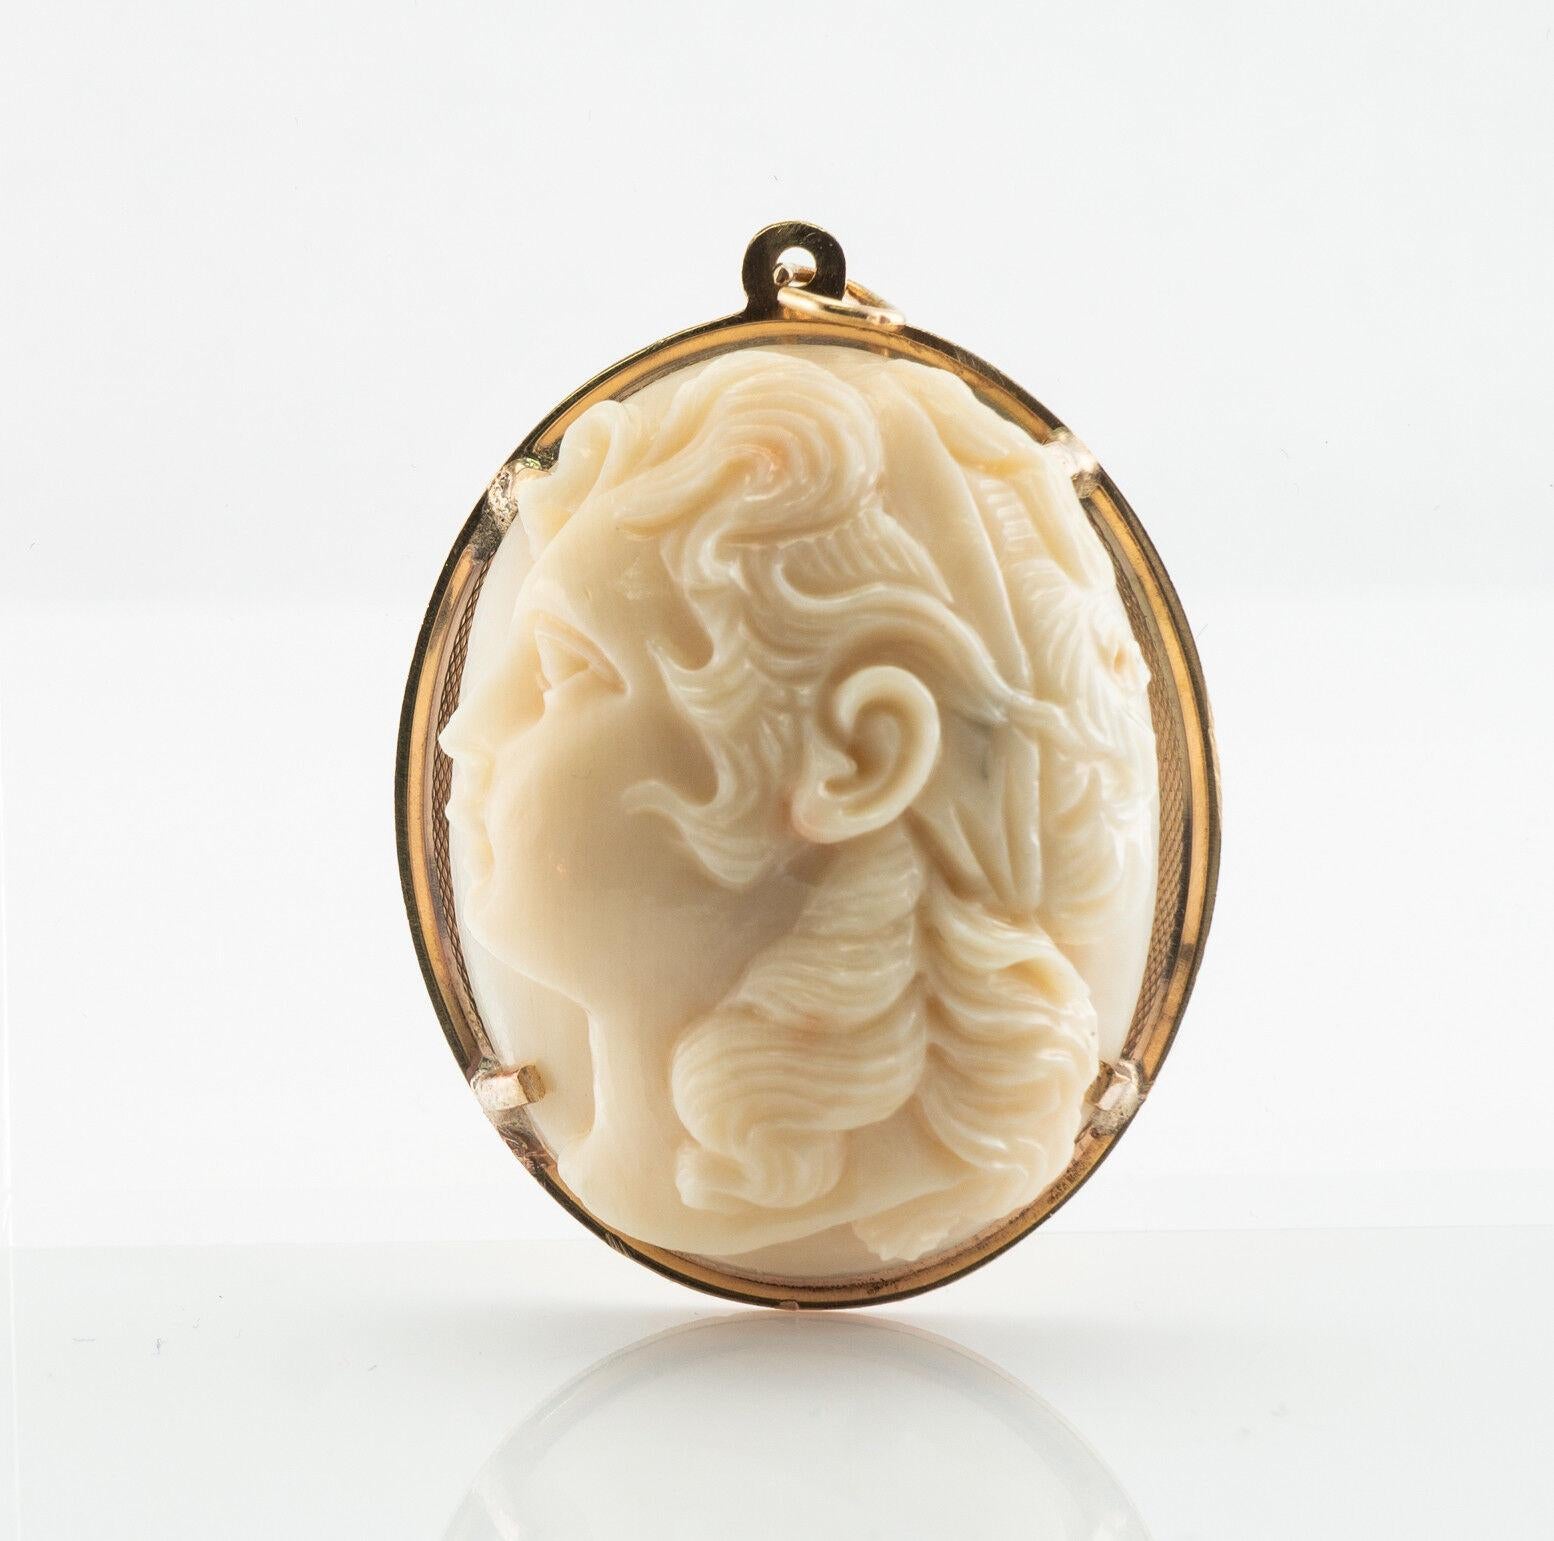 Carved White Coral Cameo Pendant 14K Gold Vintage

This gorgeous vintage pendant is finely crafted in solid 14K Yellow Gold. The natural white coral high profile cameo measure 1-3/8